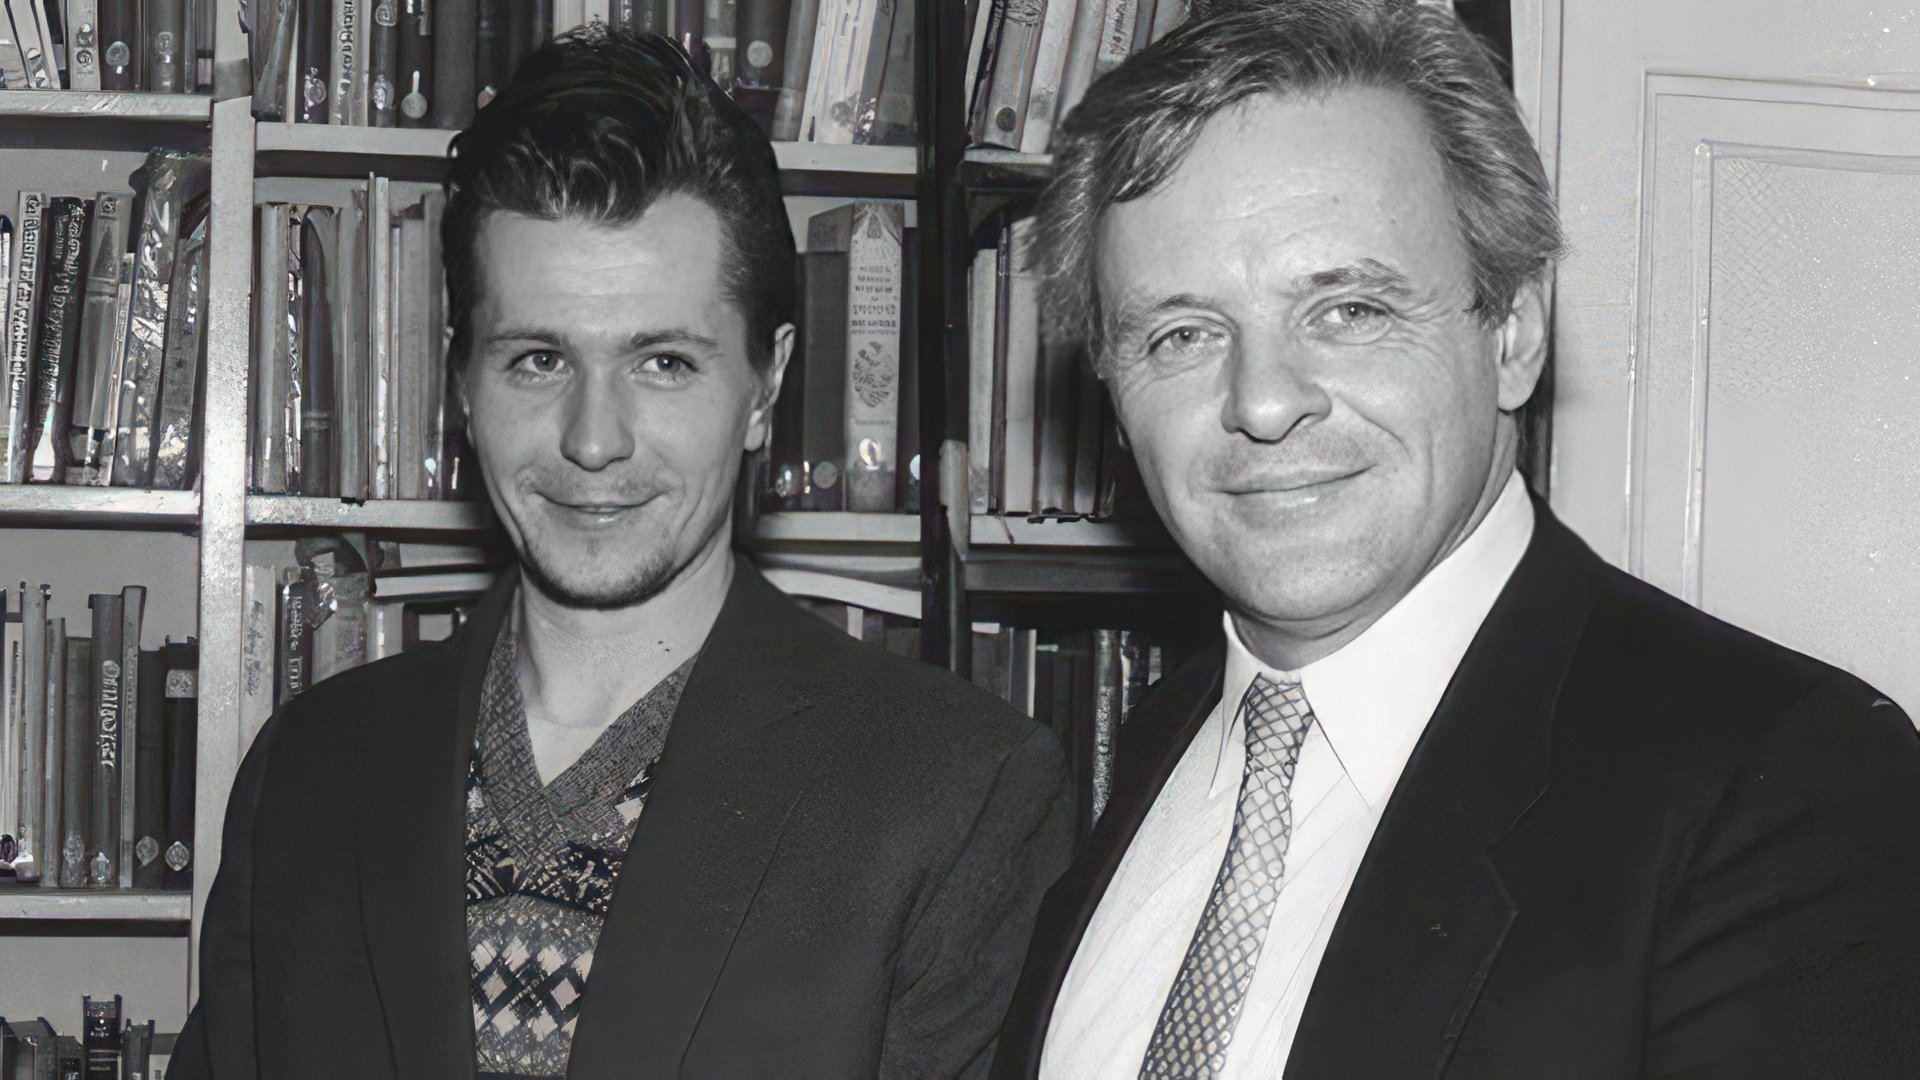 Young Gary Oldman with Anthony Hopkins